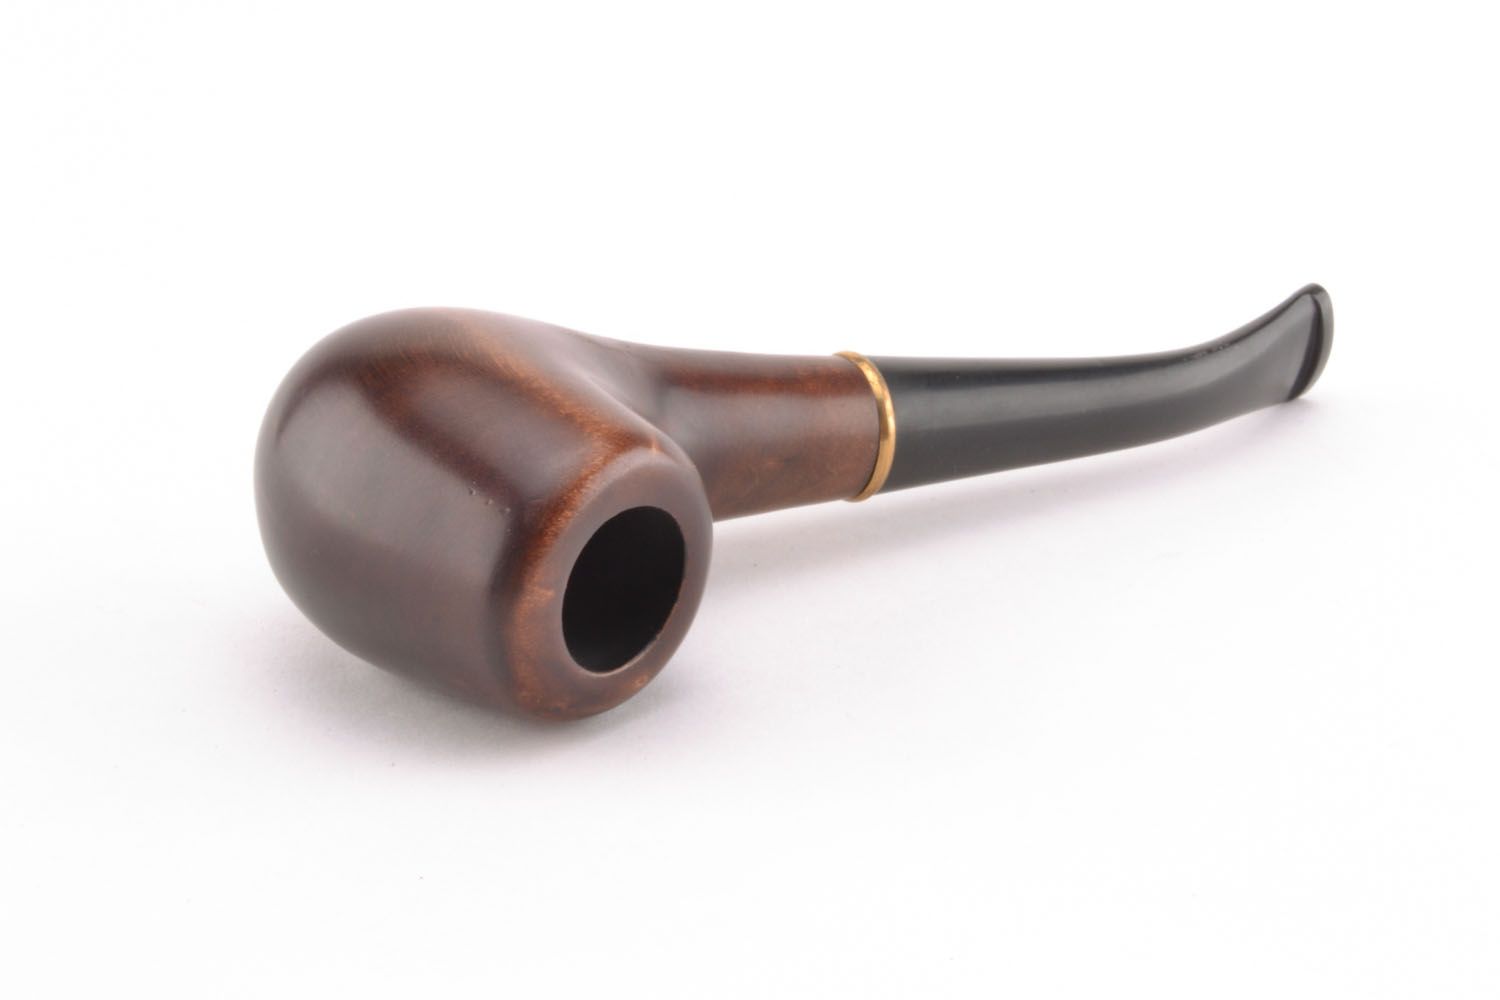 Smoking pipe made of wood for decorative use only photo 2